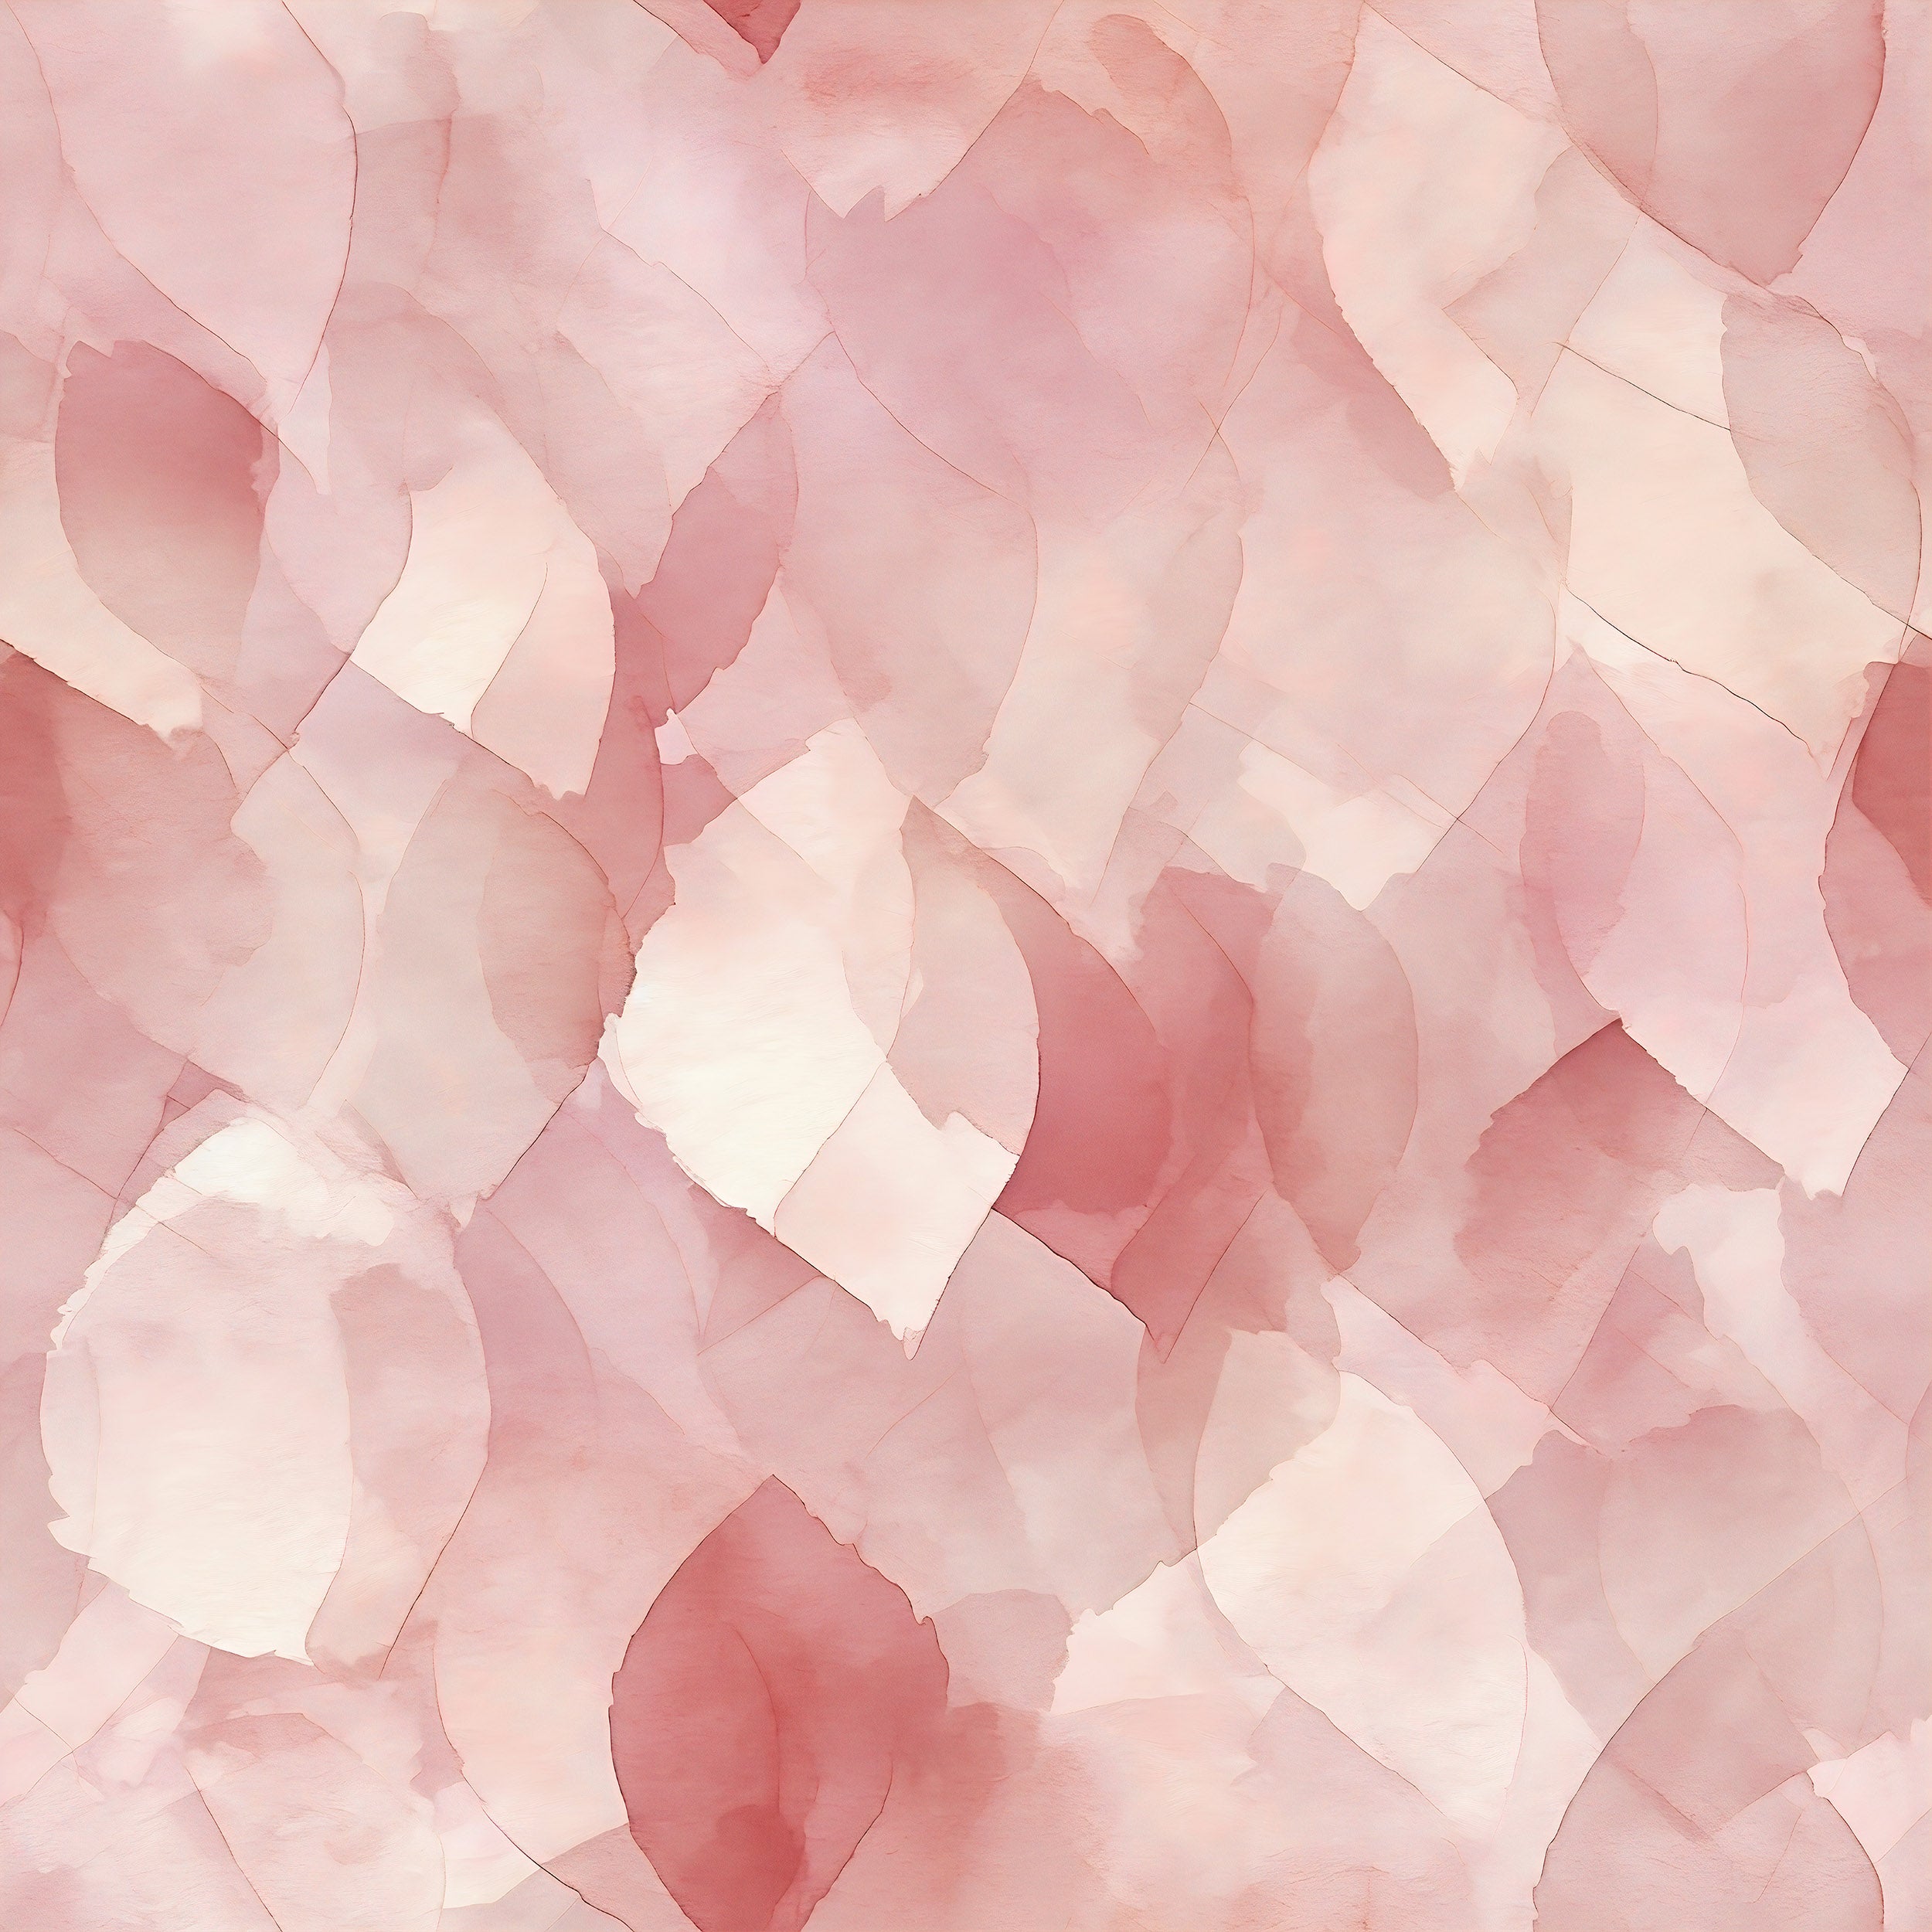 Abstract Kids Room Wall Decor in Dusty Rose